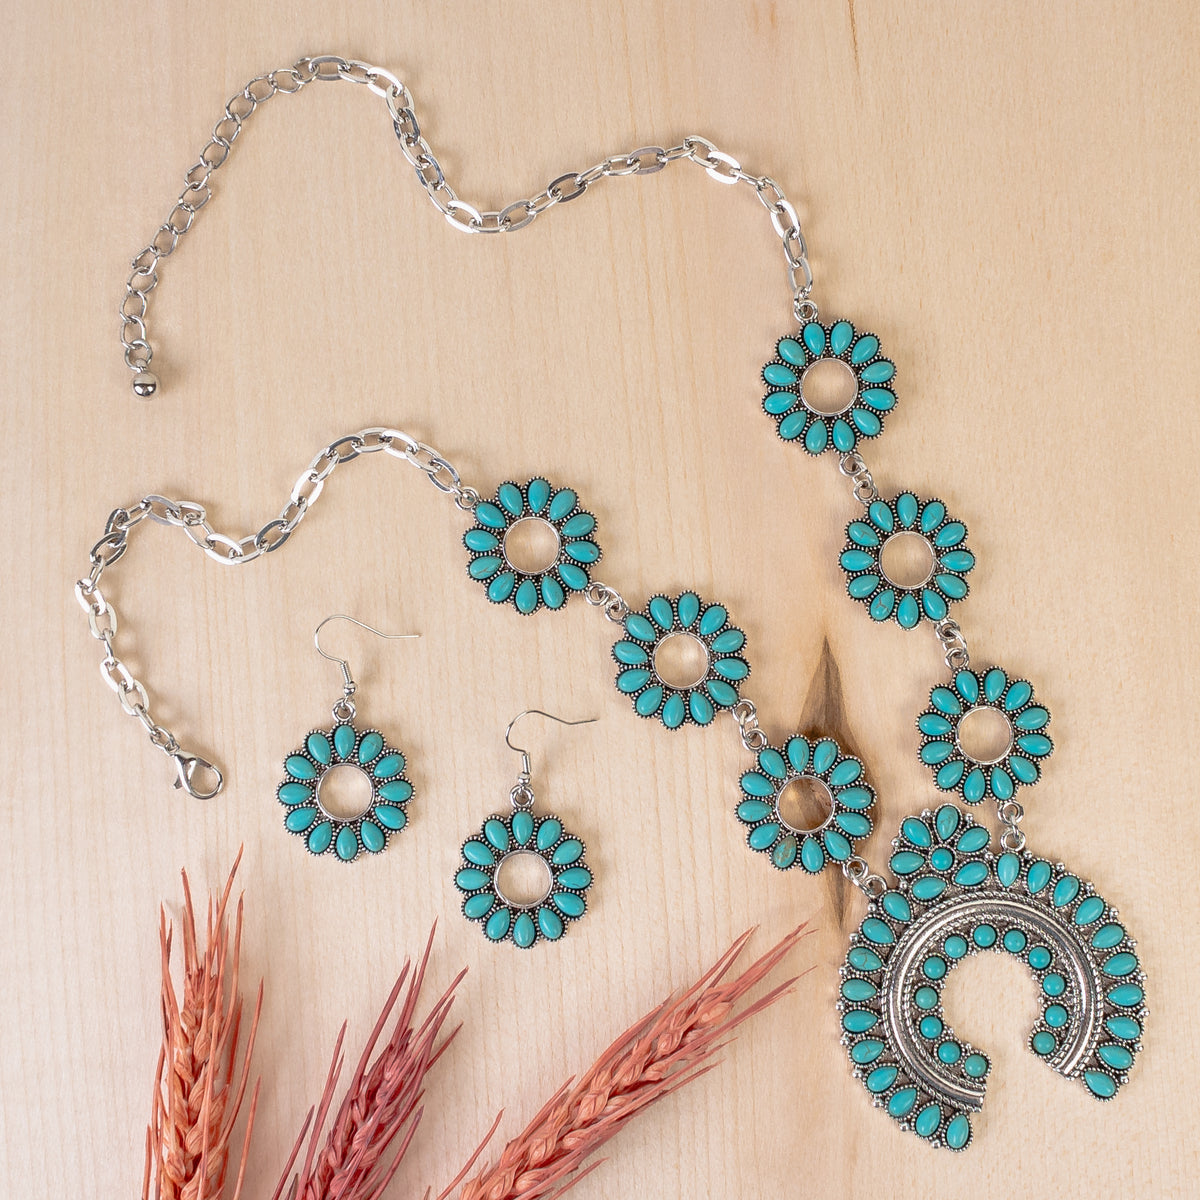 72966 - Squash Blossom Necklace - Turquoise & Silver